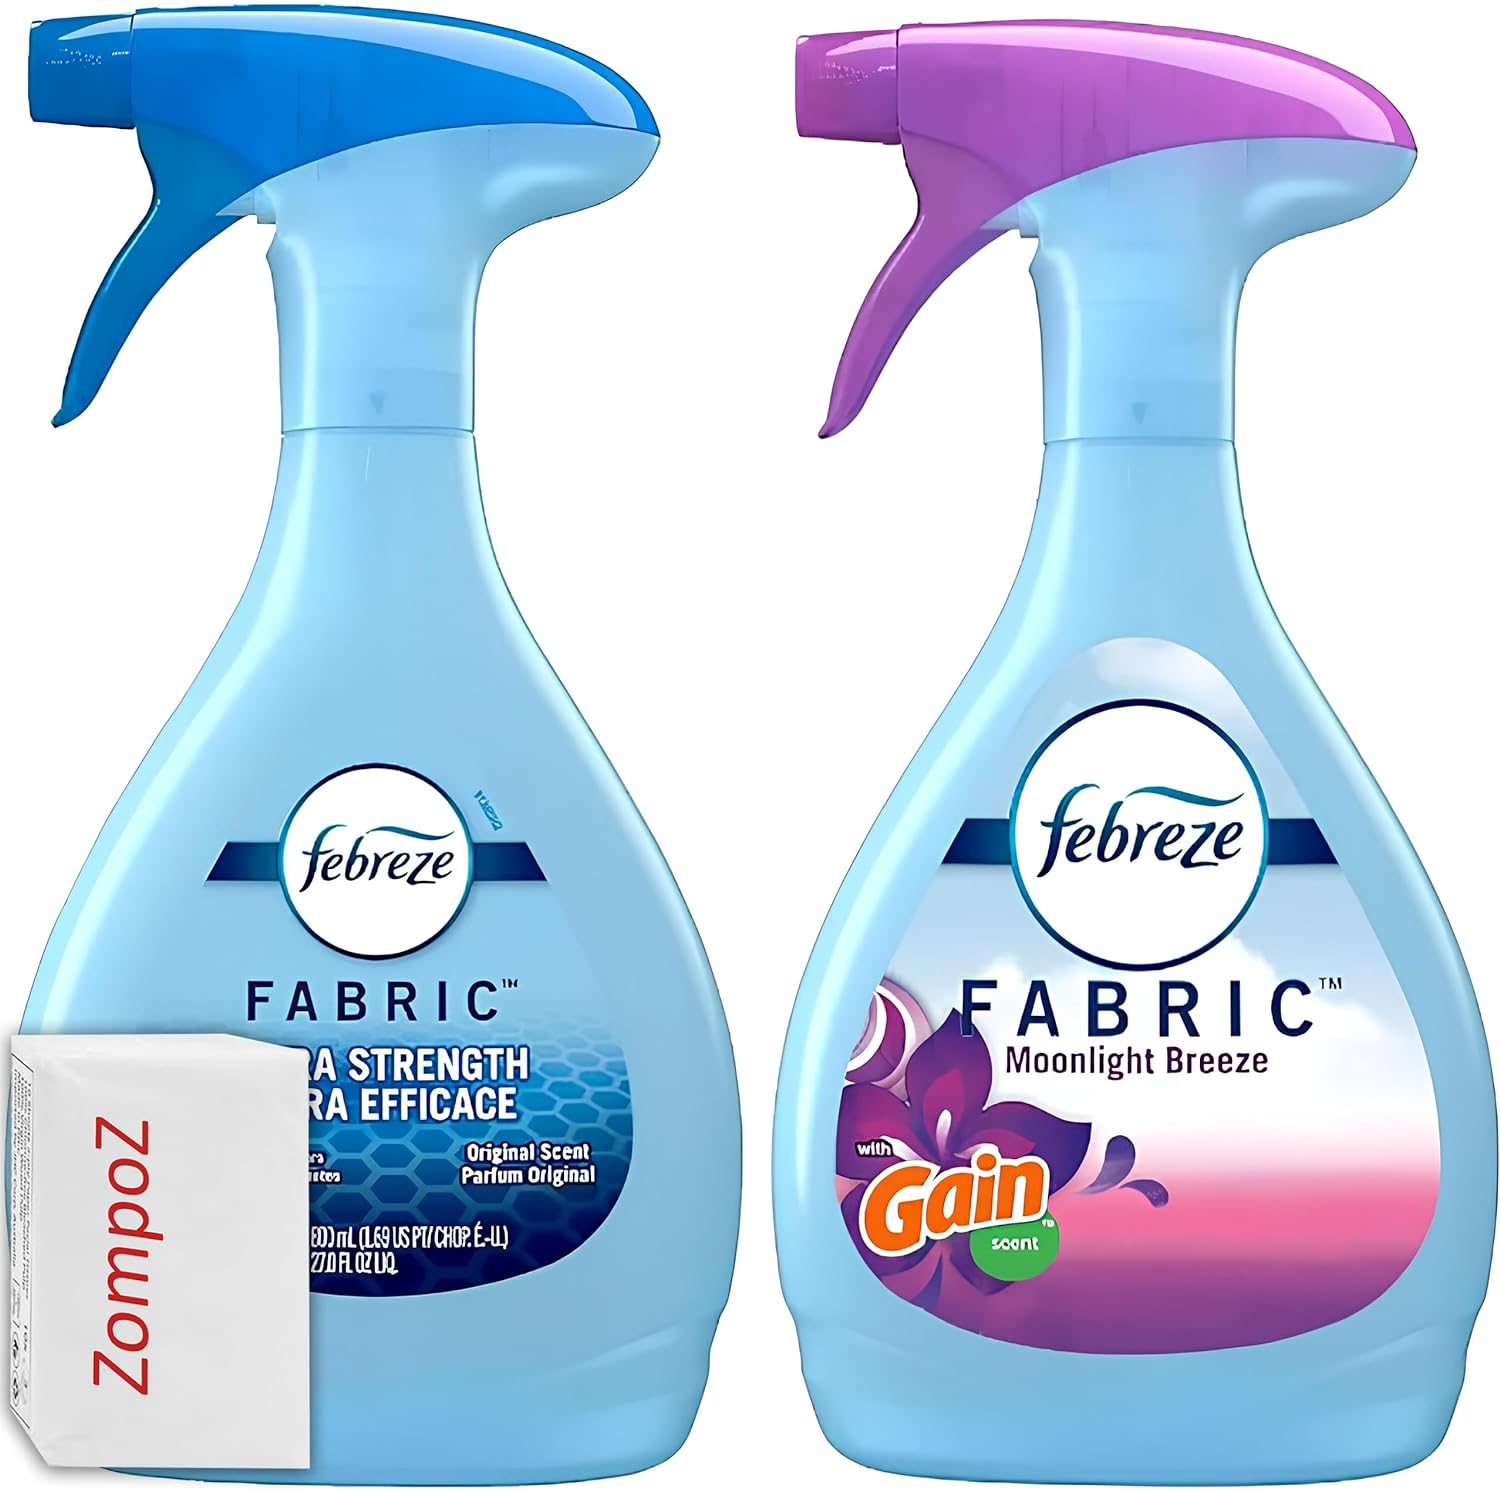 Febreze Fabric Refresher With Gain Combo Pack, Odor Eliminator Spray, For Couches and Upholstery, Original Gain and Moonlight Gain Scents, 27 Oz Each + Bonus Zompo-Z Tissue Packet